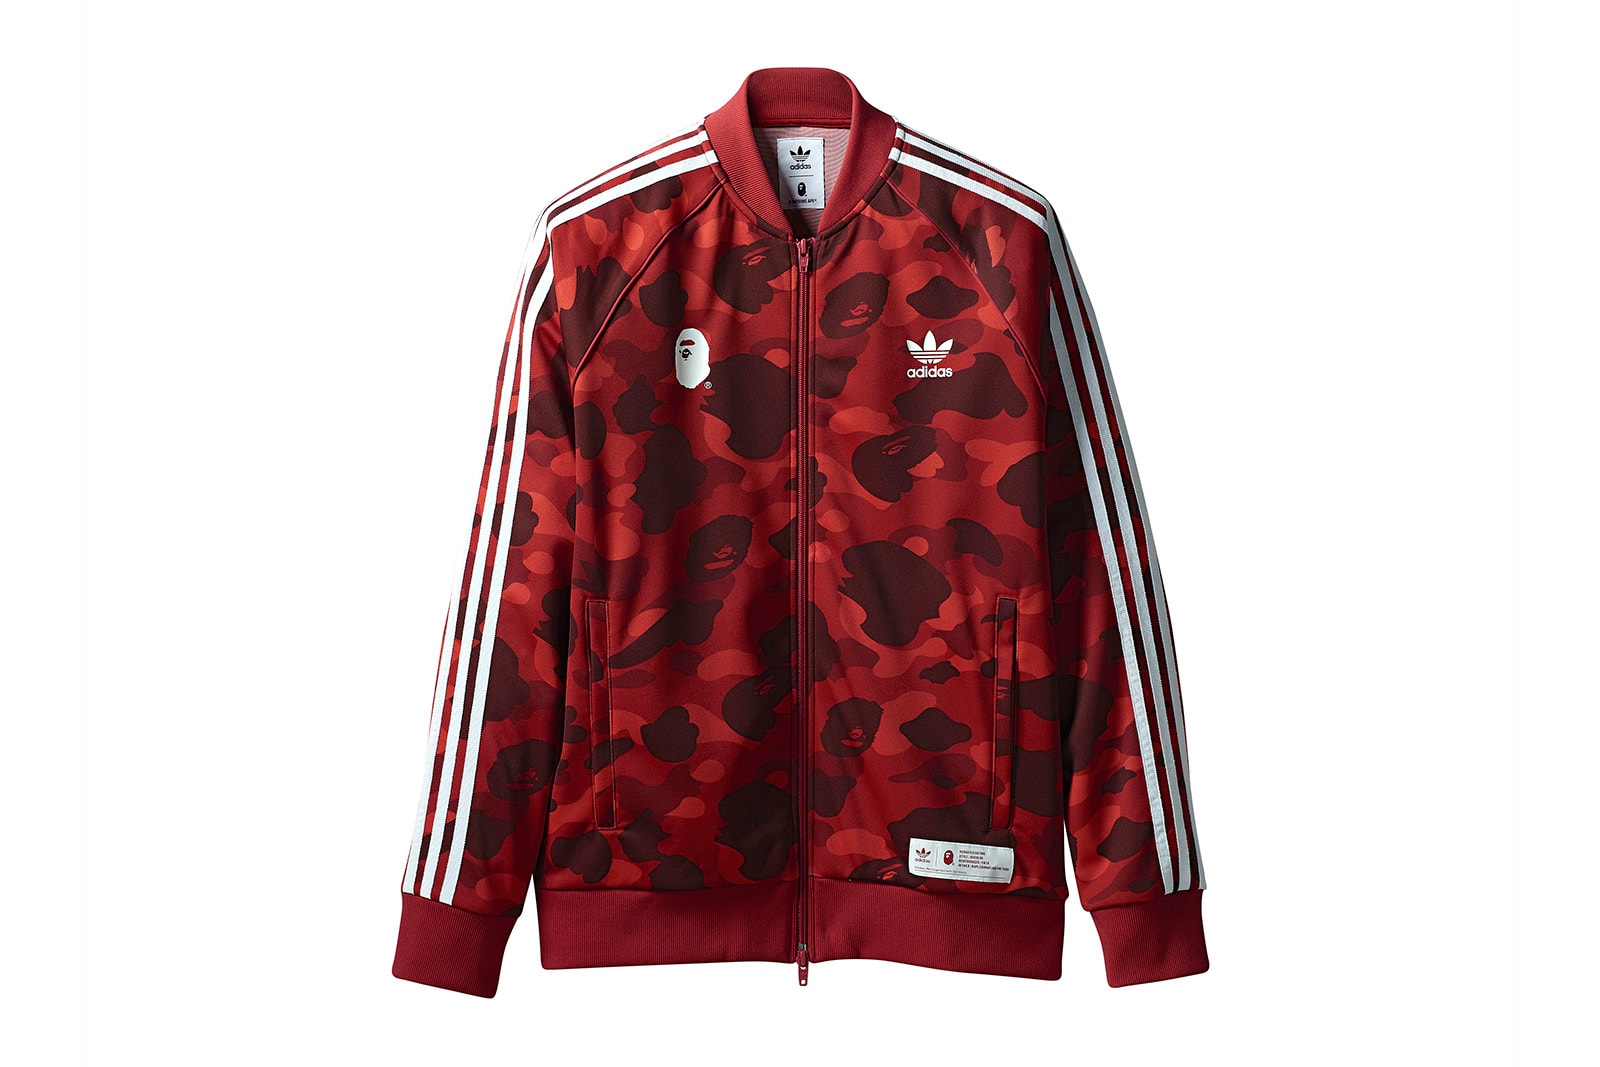 BAPE adidas Originals 2018 Apparel Collection Collaboration Collab adicolor Release Details Camouflage Release Information Details First Look Closer